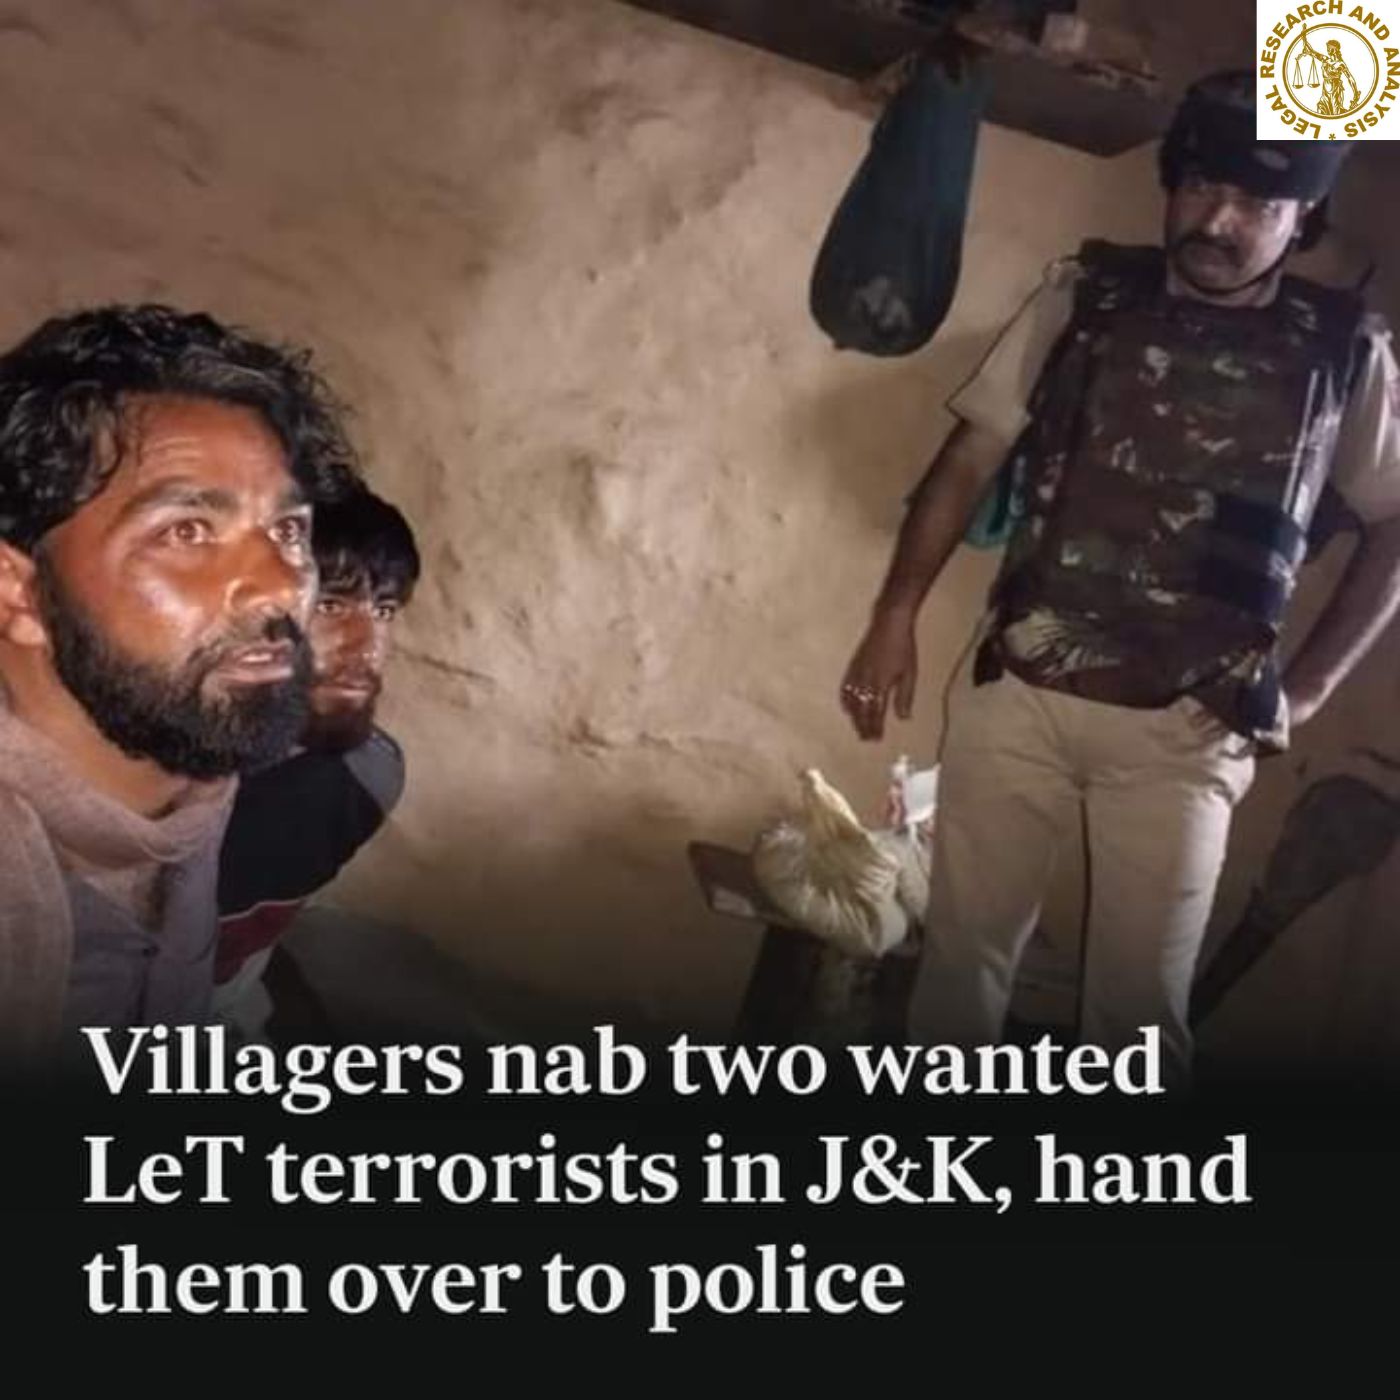 Villagers nab two wanted LeT terrorists in J&K, hand them over to police.